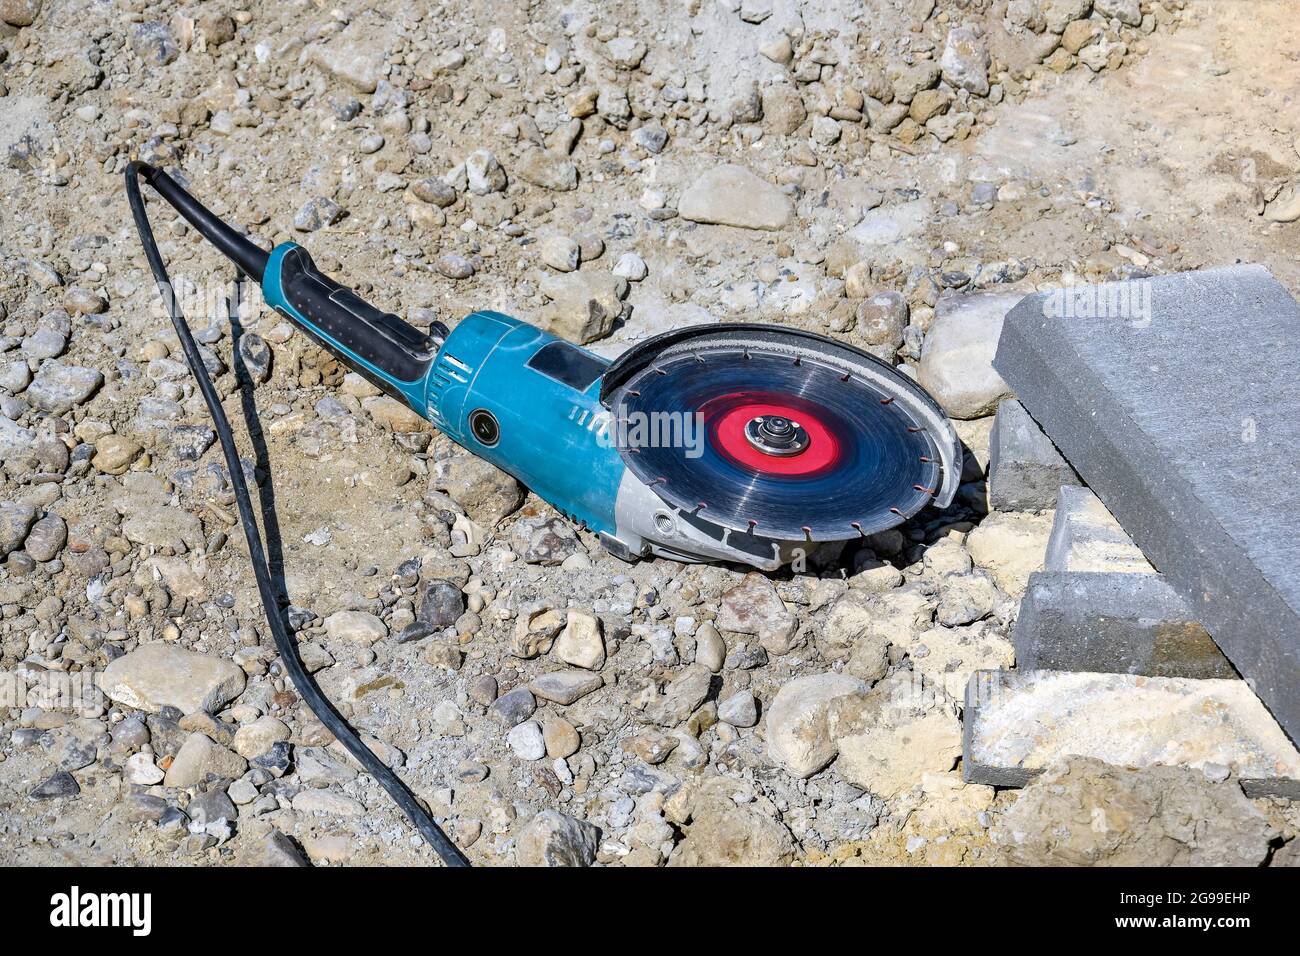 Electric tool with diamond disc for cutting stones lies on gravel. Angle grinder is ready for operation. Stone cutting technology. Close-up. Stock Photo